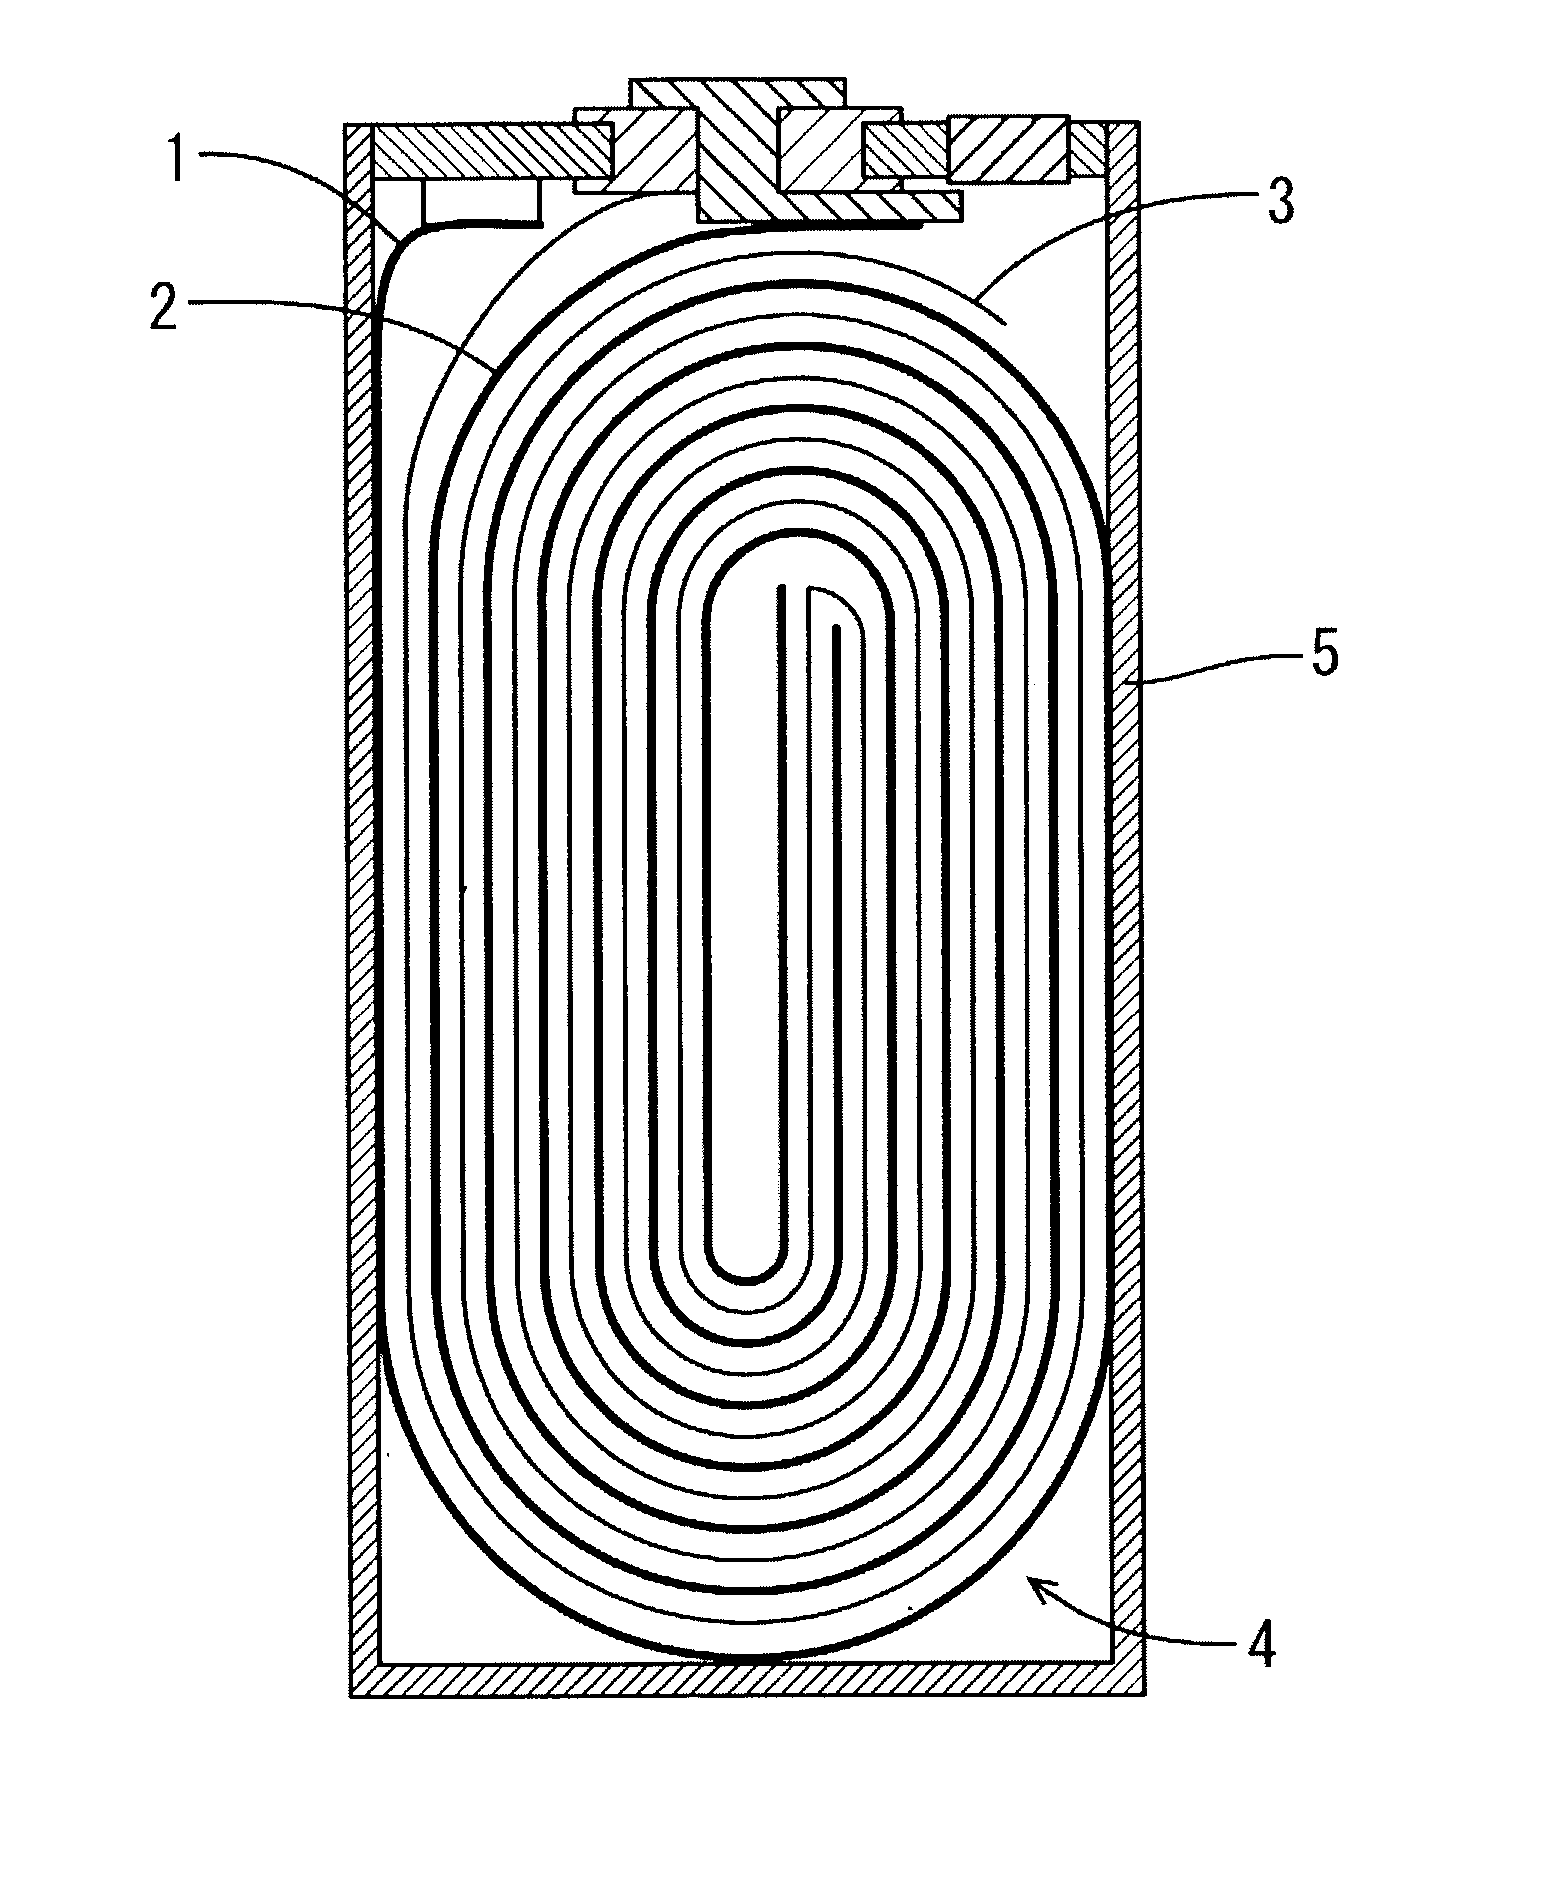 Nonaqueous electrolyte cell and its manufacturing method